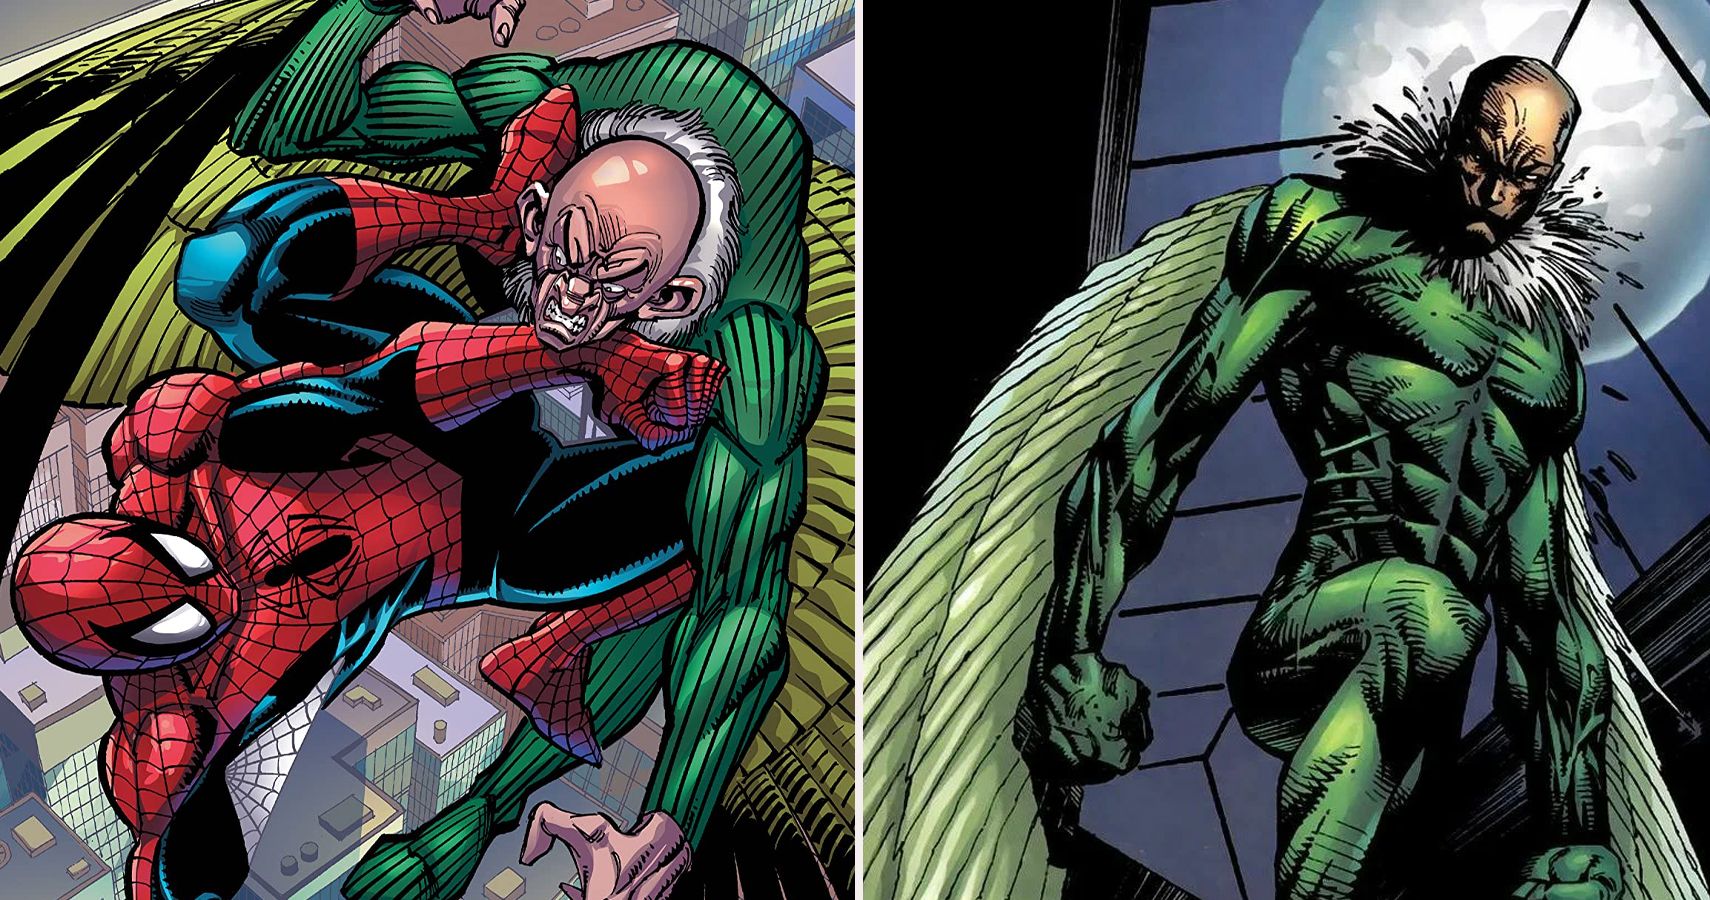 Spider-Man-10-Things-Fans-Should-Know-About-The-Vulture-featured-image.jpg